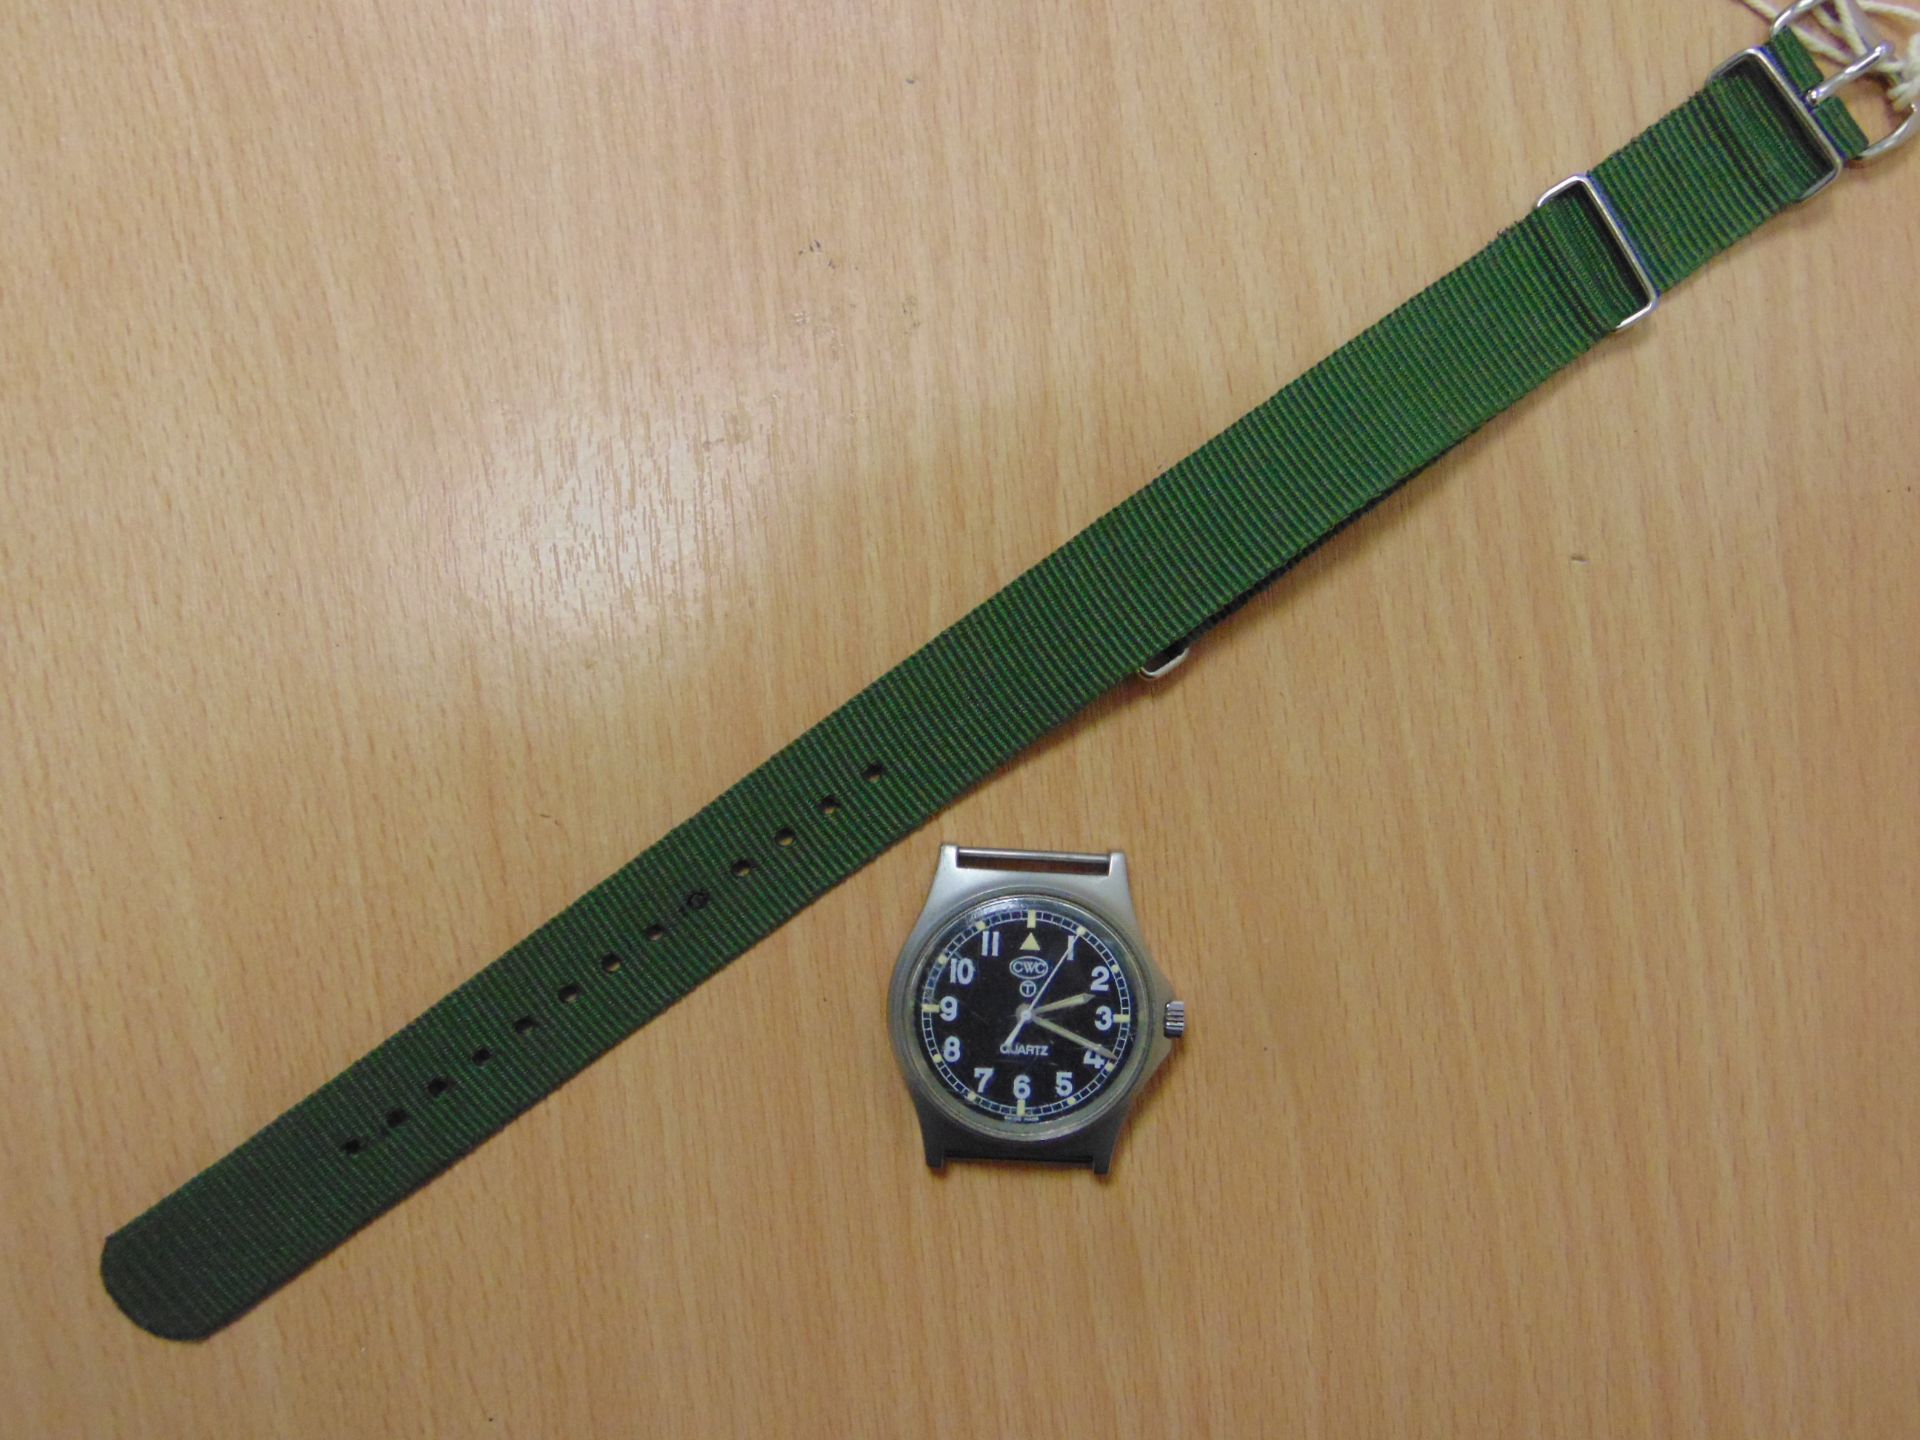 VERY NICE CWC W10 BRITISH ARMY SERVICE WATCH NATO MARKED DATED 1997 - Image 8 of 8